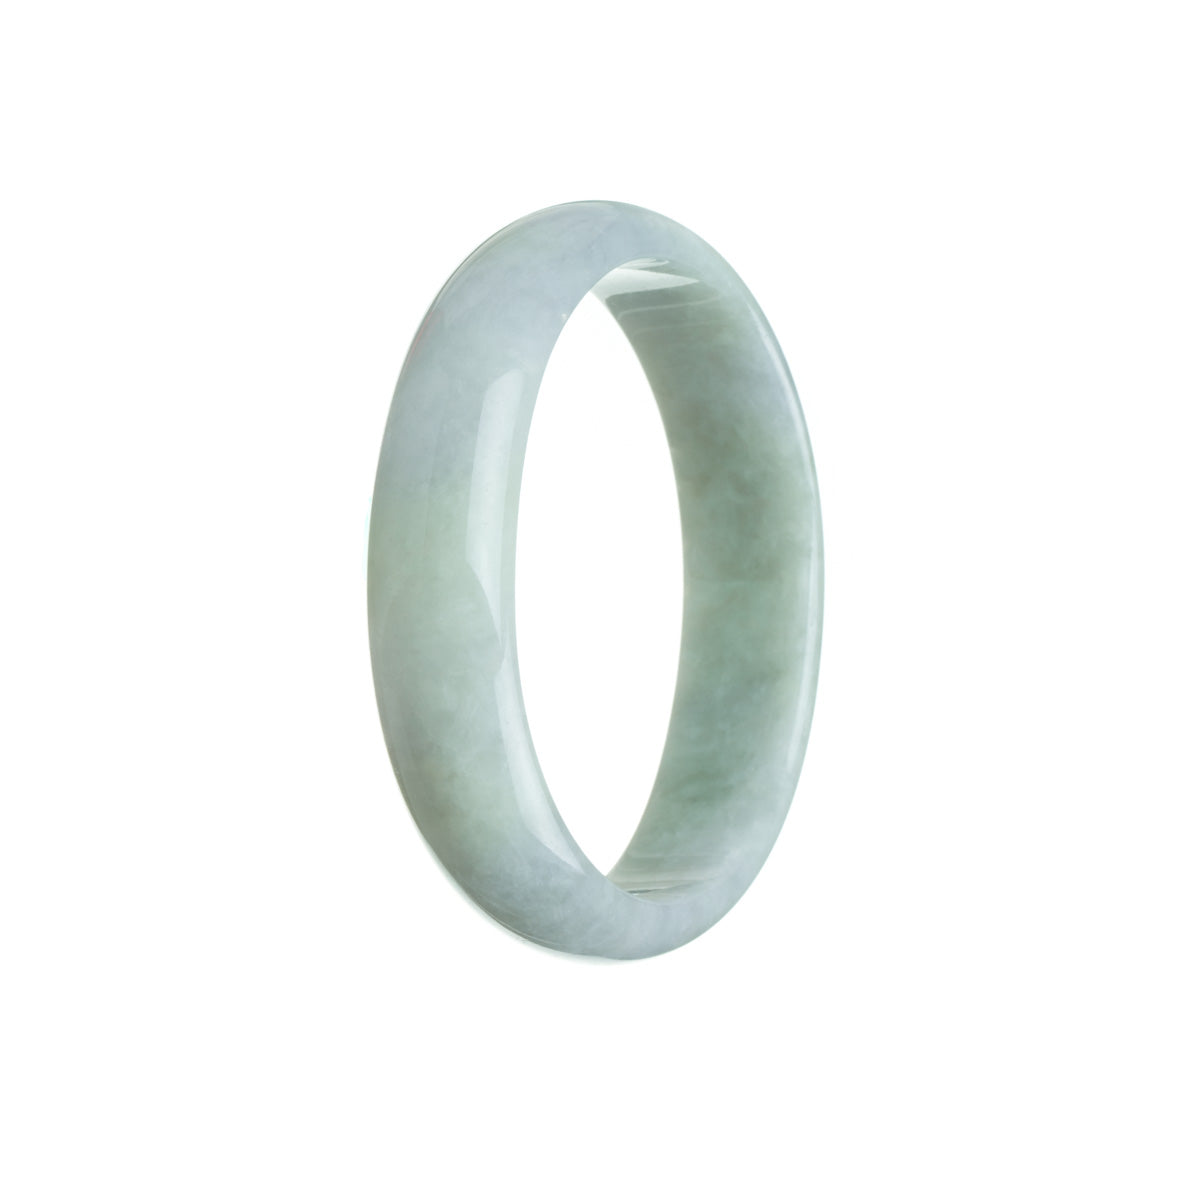 A stunning pale green jadeite jade bracelet with a hint of lavender, featuring an oval shape measuring 57mm. A beautiful piece from MAYS GEMS.